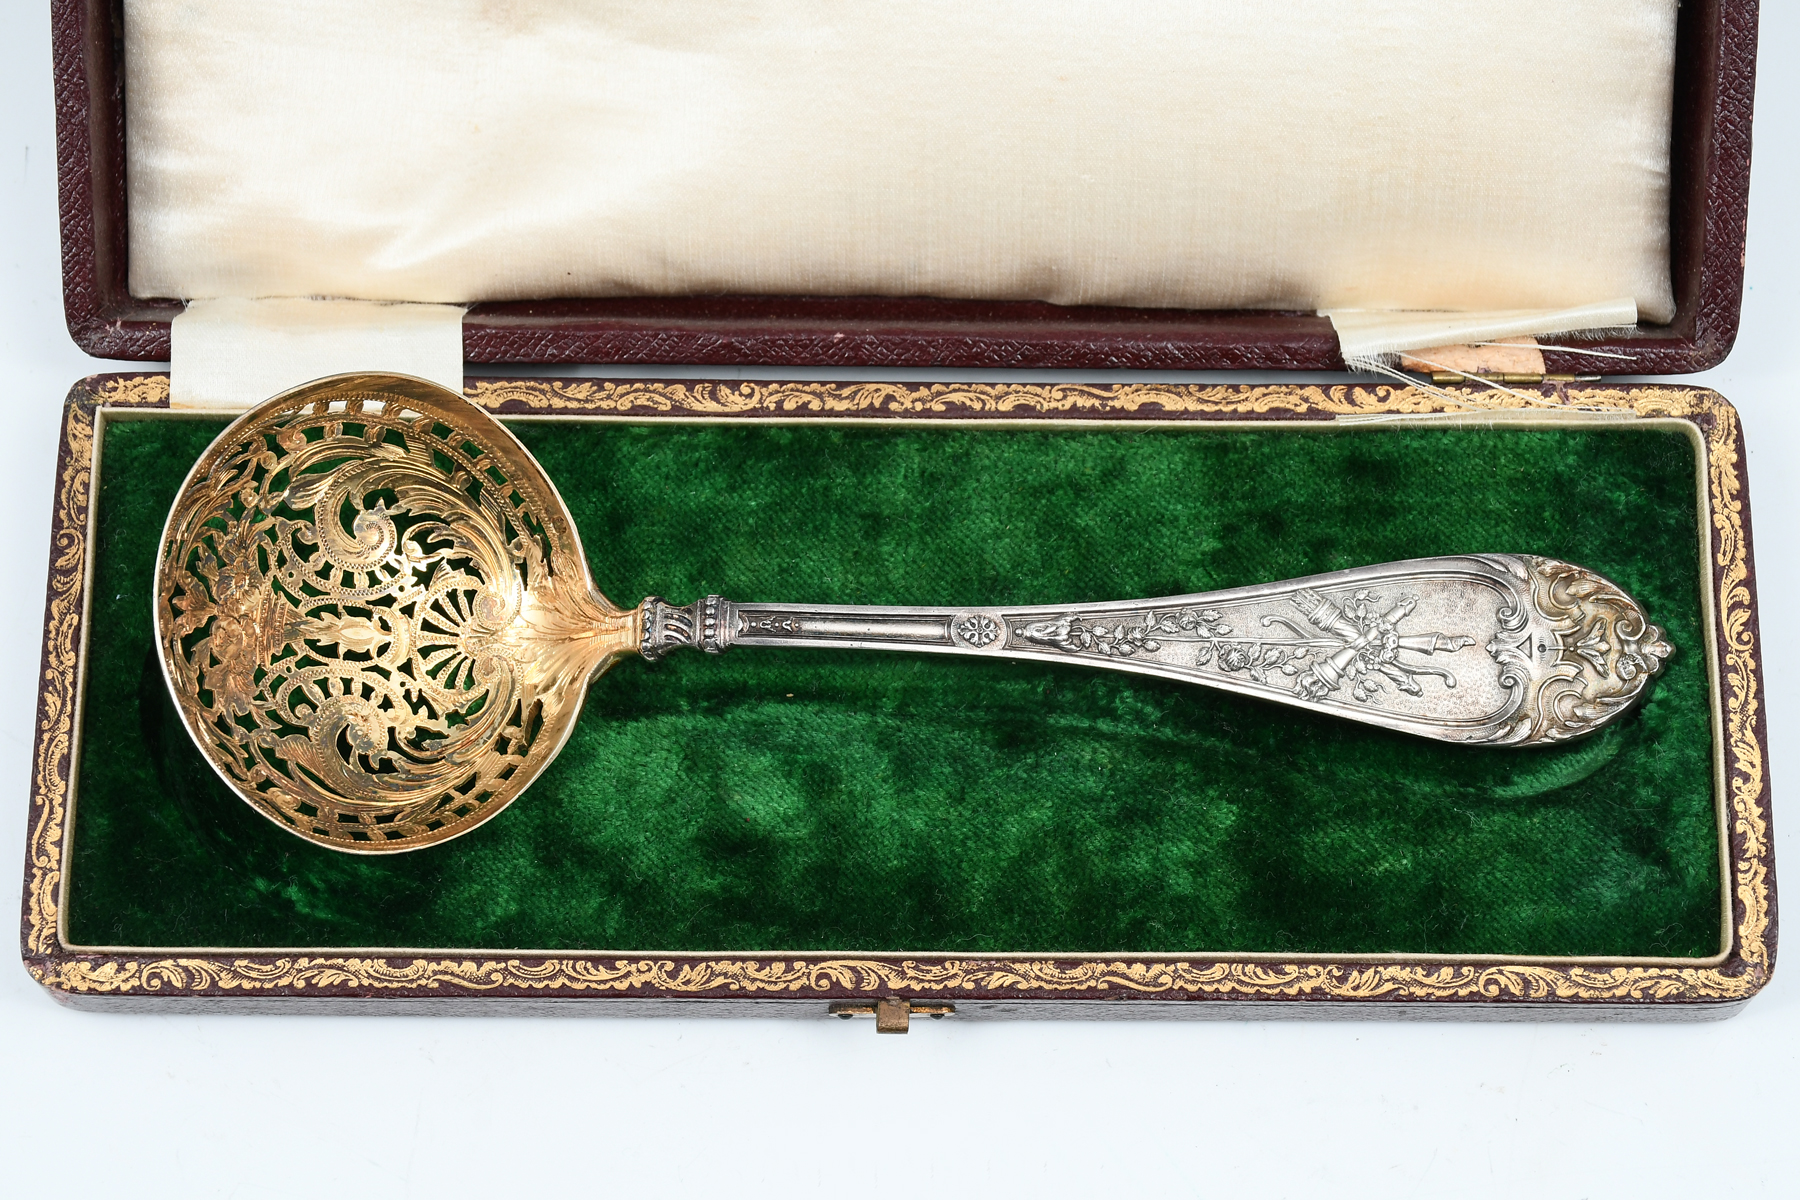 19TH-CENTURY FRENCH SILVER SPOON